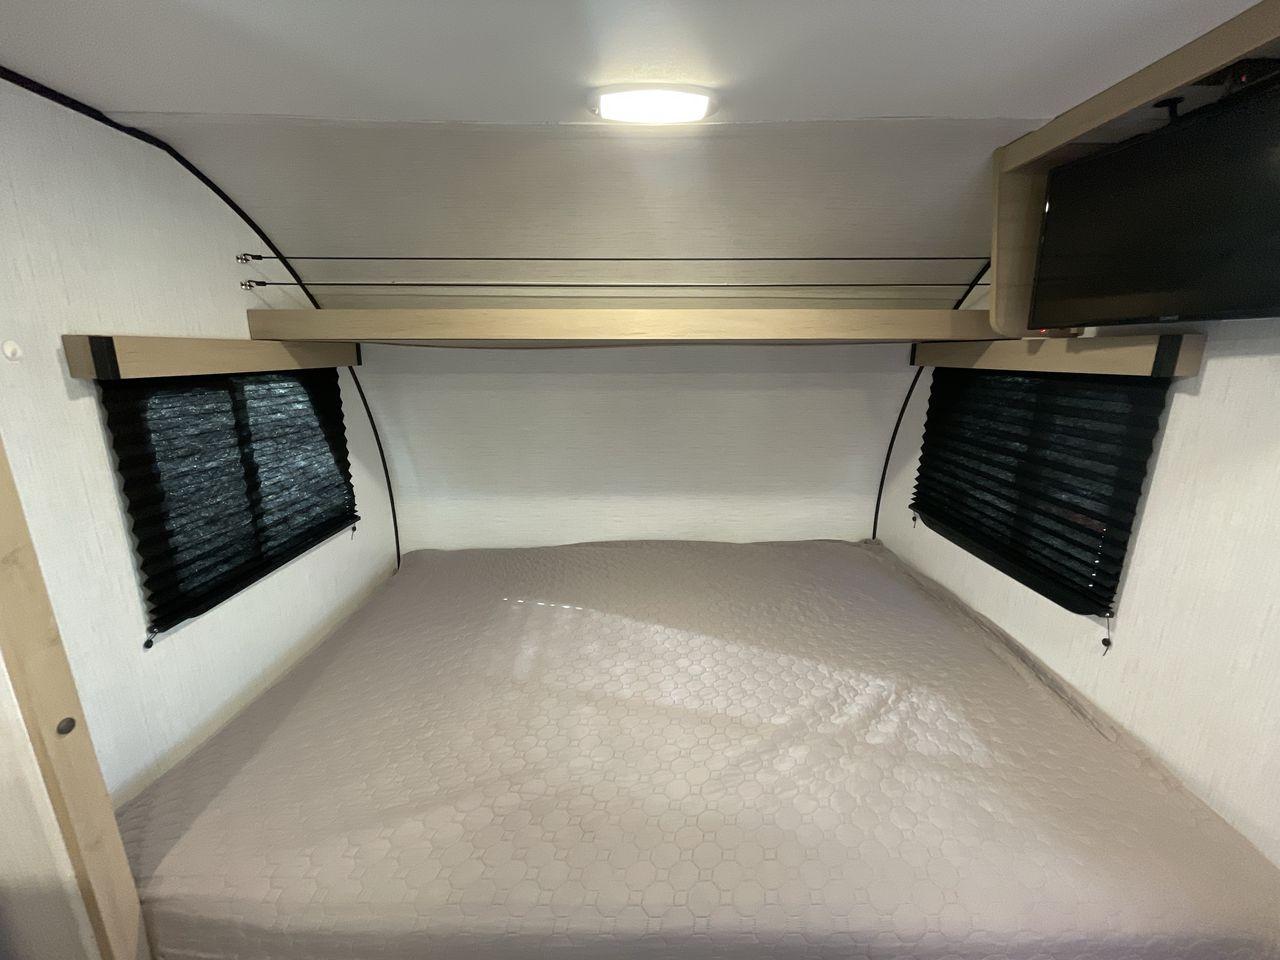 2022 CRUISER RV HITCH 18BHS (5RXRB2319N1) , Length: 22 ft | Dry Weight: 4,030 lbs | Gross Weight: 5,000 lbs | Slides: 1 transmission, located at 4319 N Main Street, Cleburne, TX, 76033, (817) 221-0660, 32.435829, -97.384178 - The 2022 Cruiser RV Corp Hitch 18BHS is a compact yet feature-packed travel trailer perfect for those who value comfort and convenience during their travels. Featuring a sleek and modern exterior design, this lightweight trailer measures approximately 22 feet in length, making it easy to tow and man - Photo #18